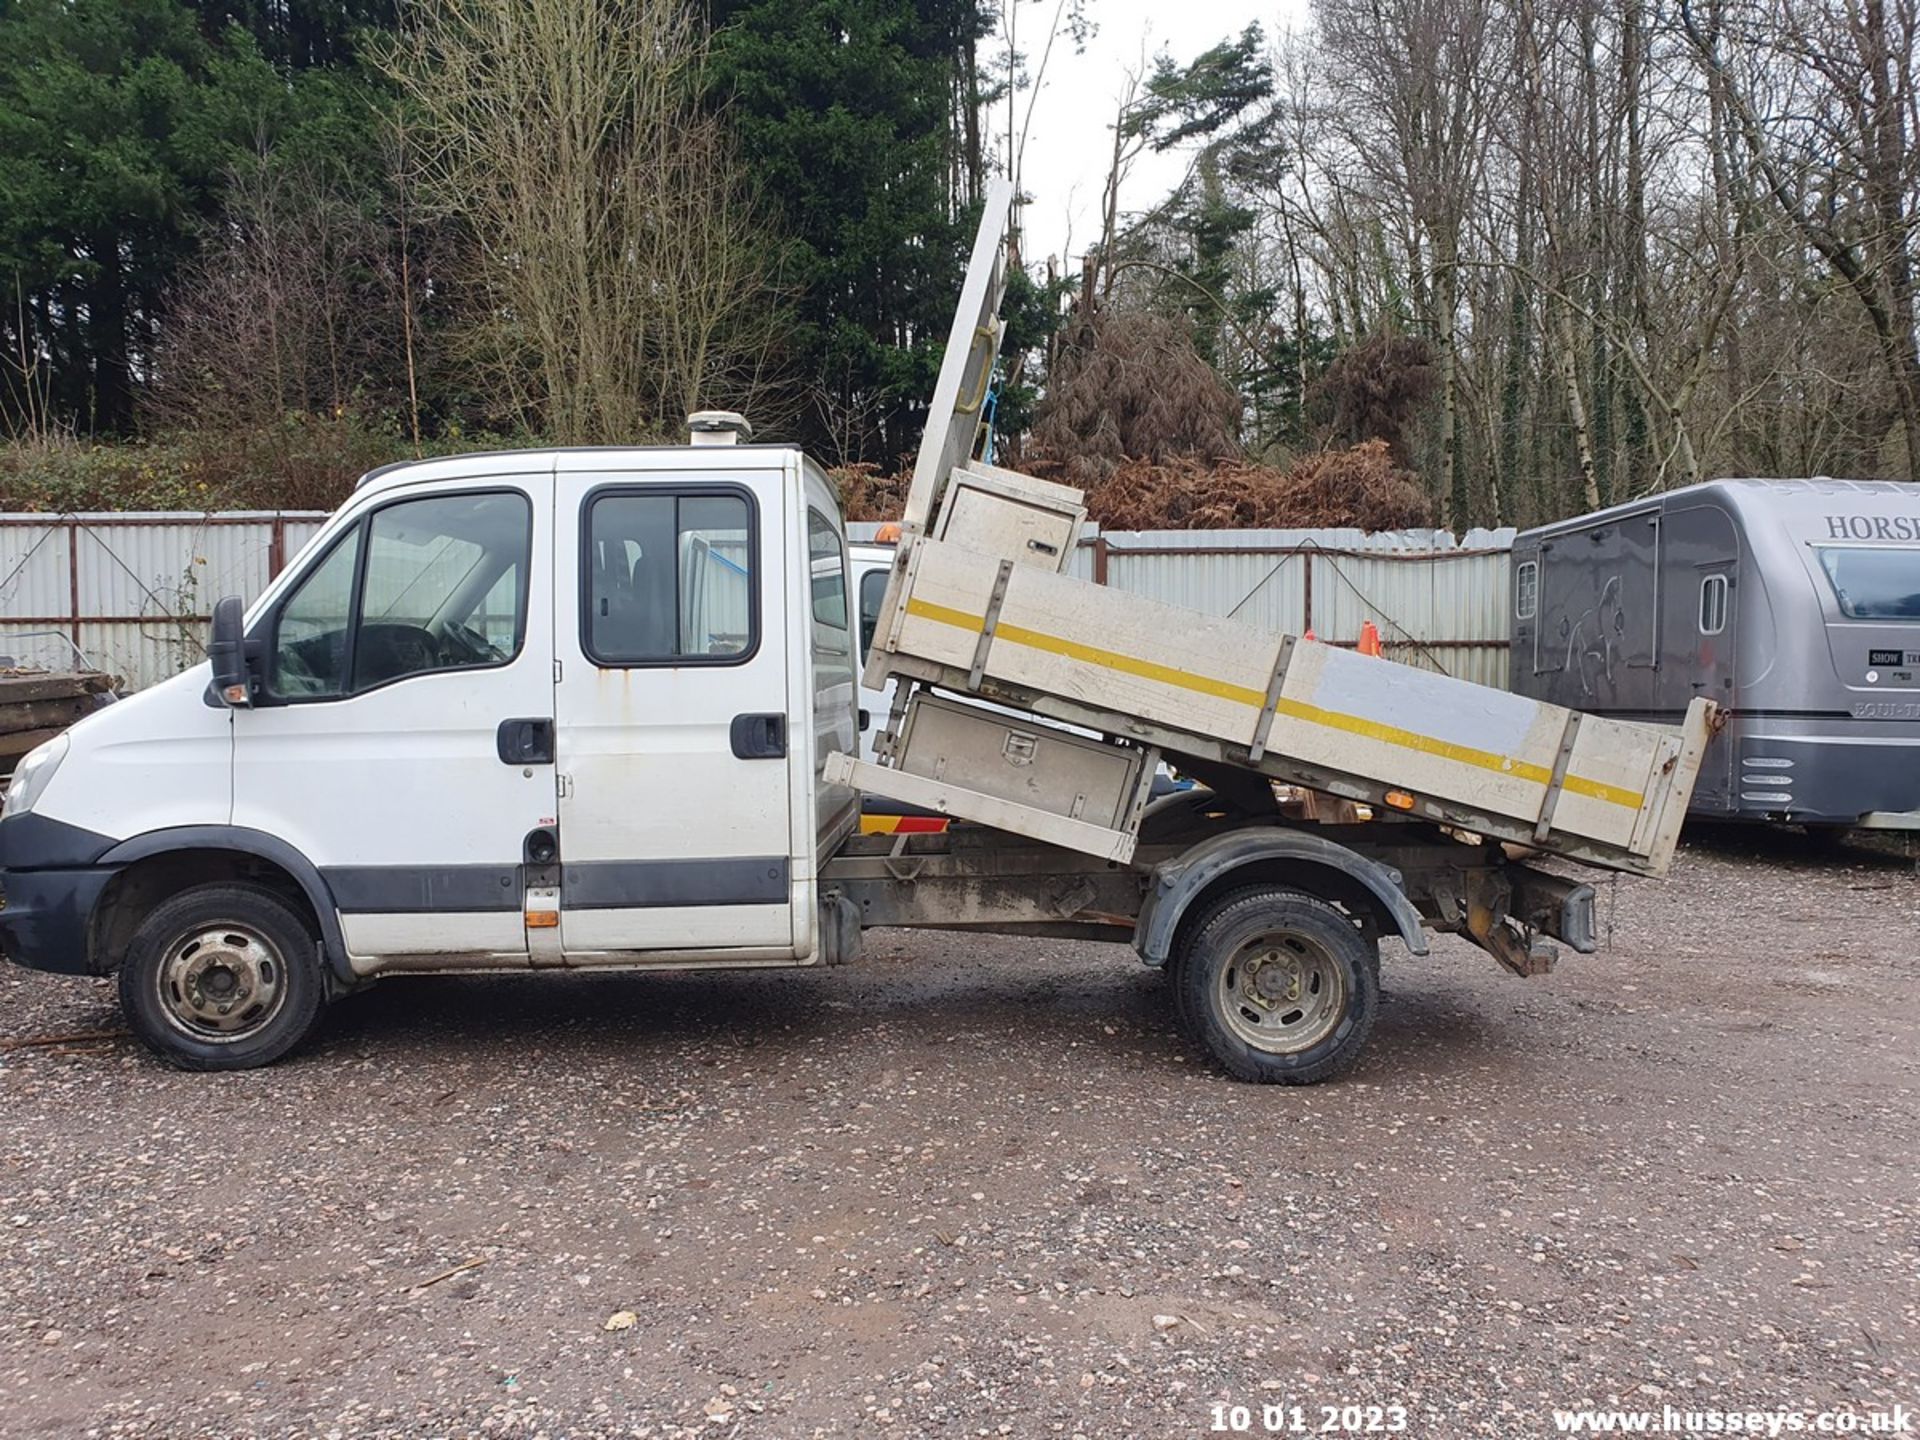 14/64 IVECO DAILY 50C15 - 2998cc 4dr Tipper (White, 108k) - Image 19 of 26